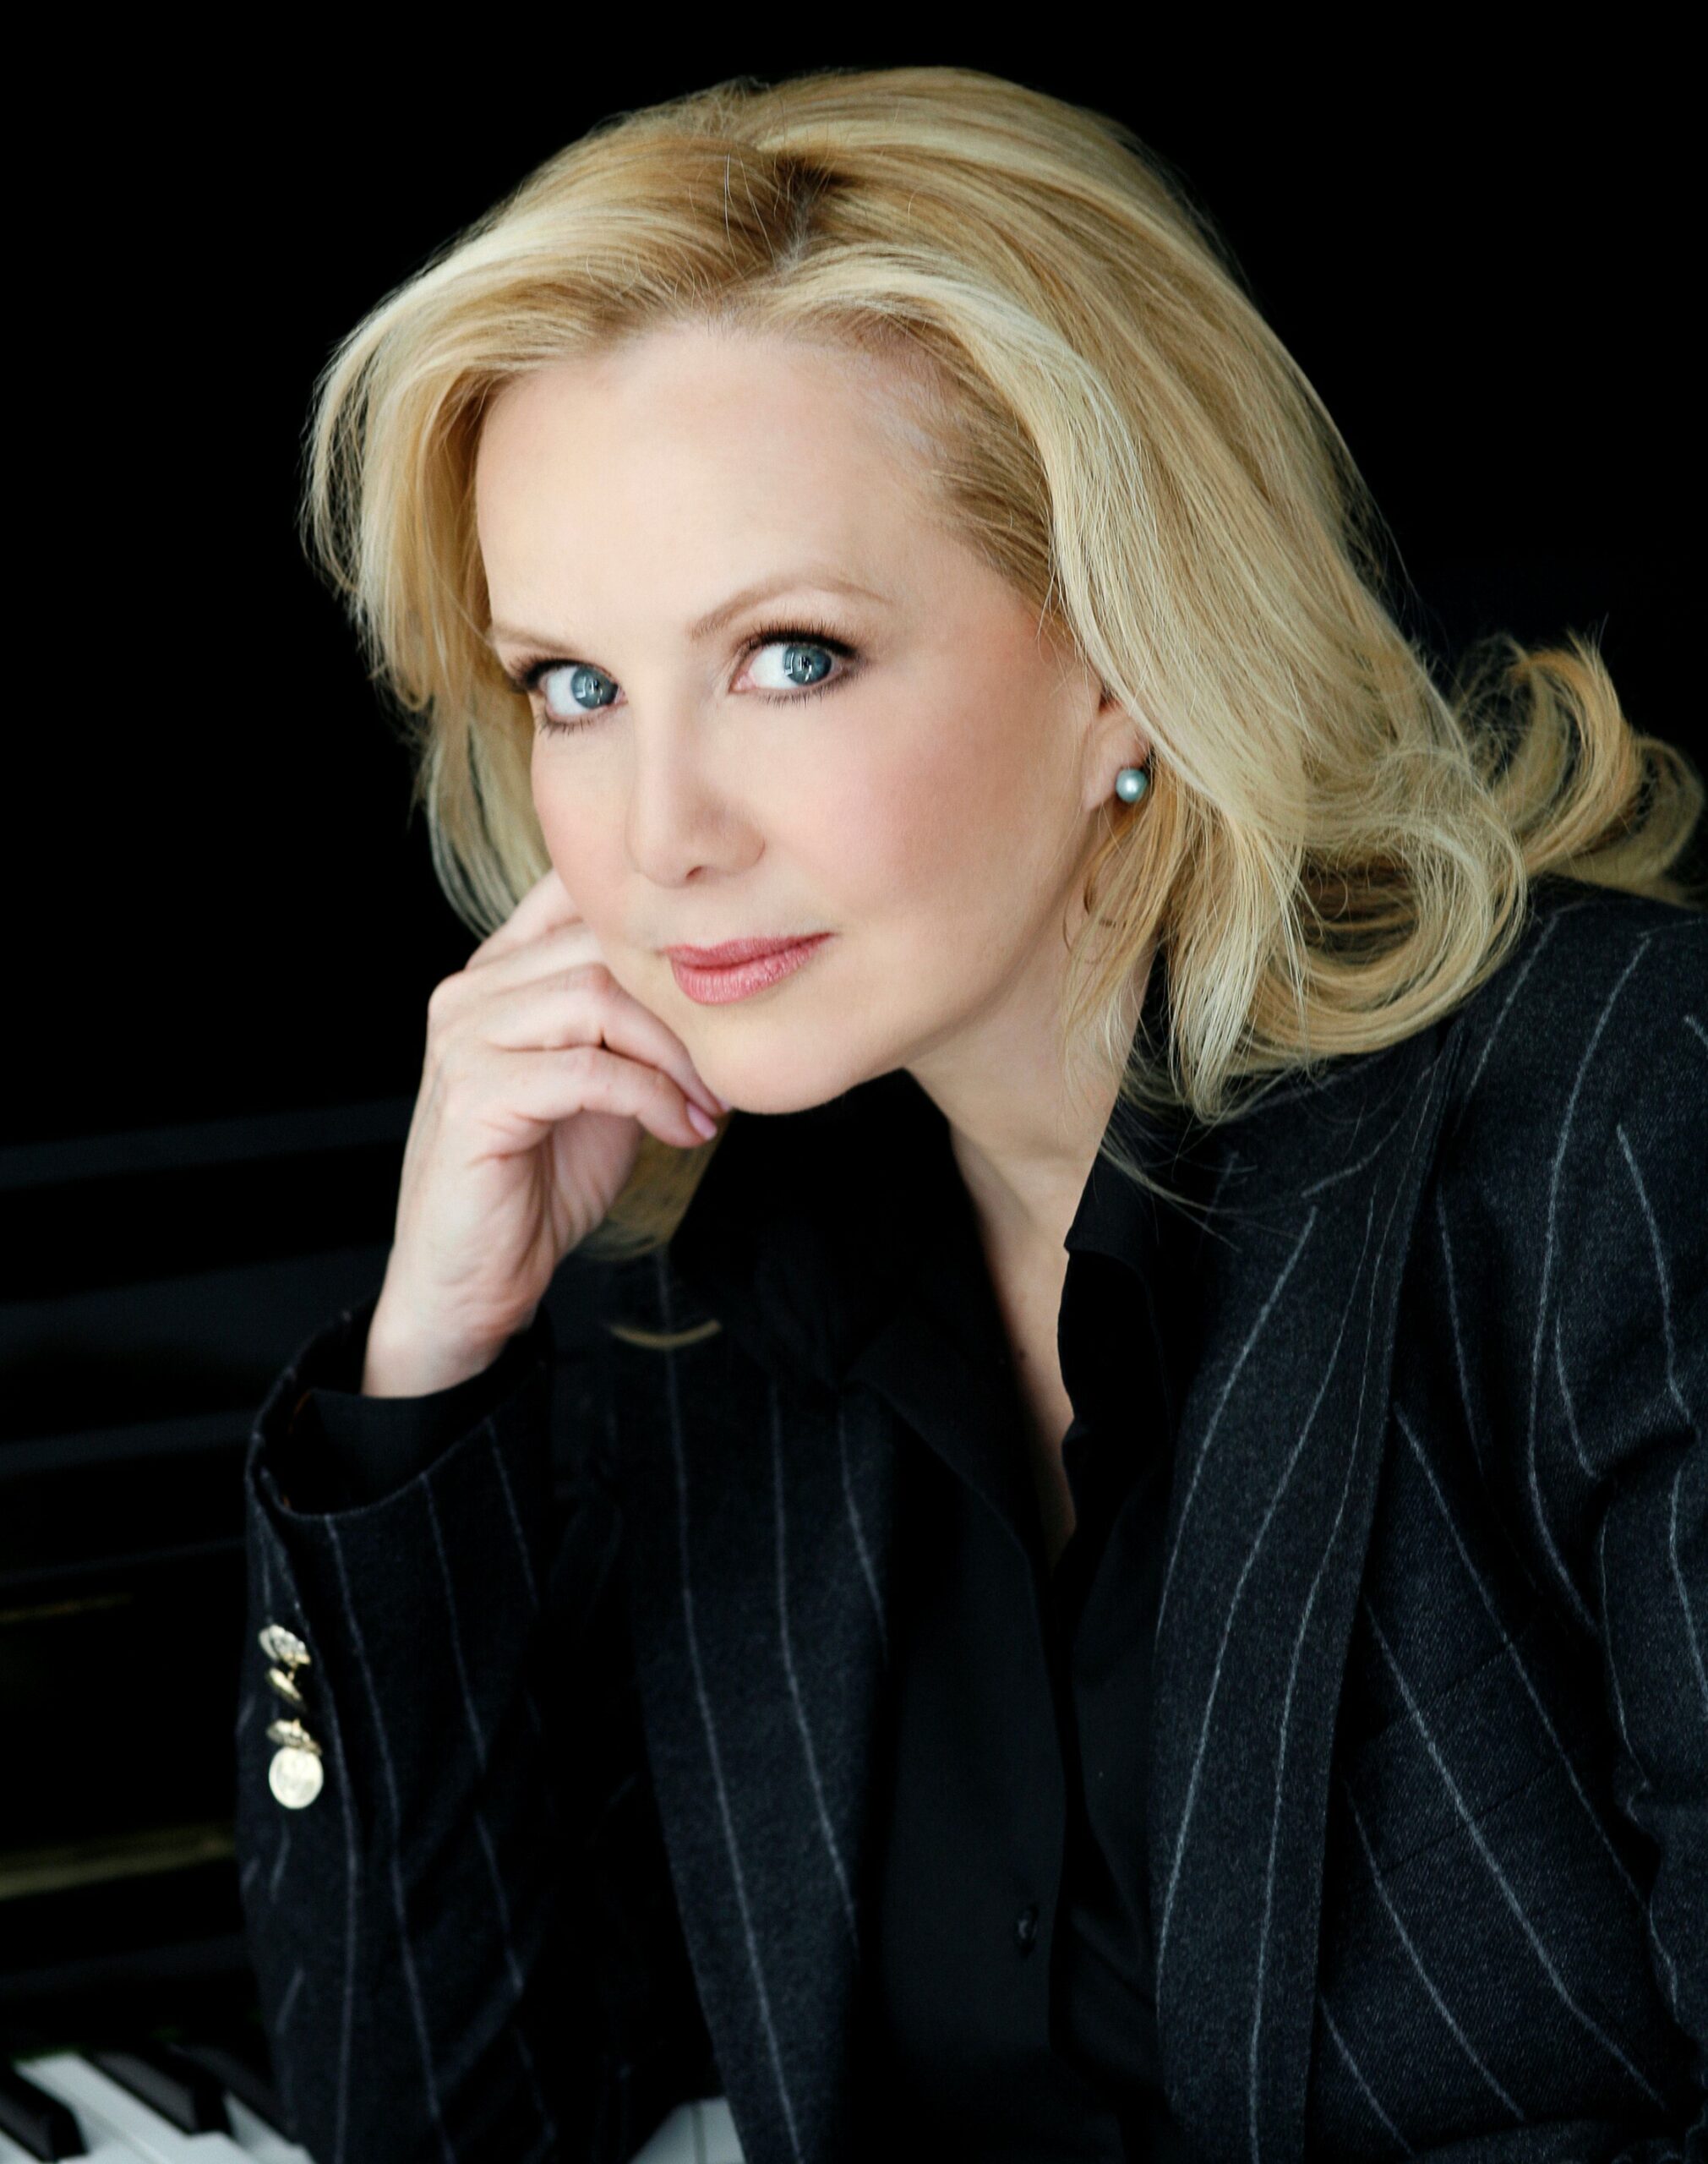 Susan Stroman directs Terrence McNally's “Master Class” running August 1–August 27 at Bay Street Theater.